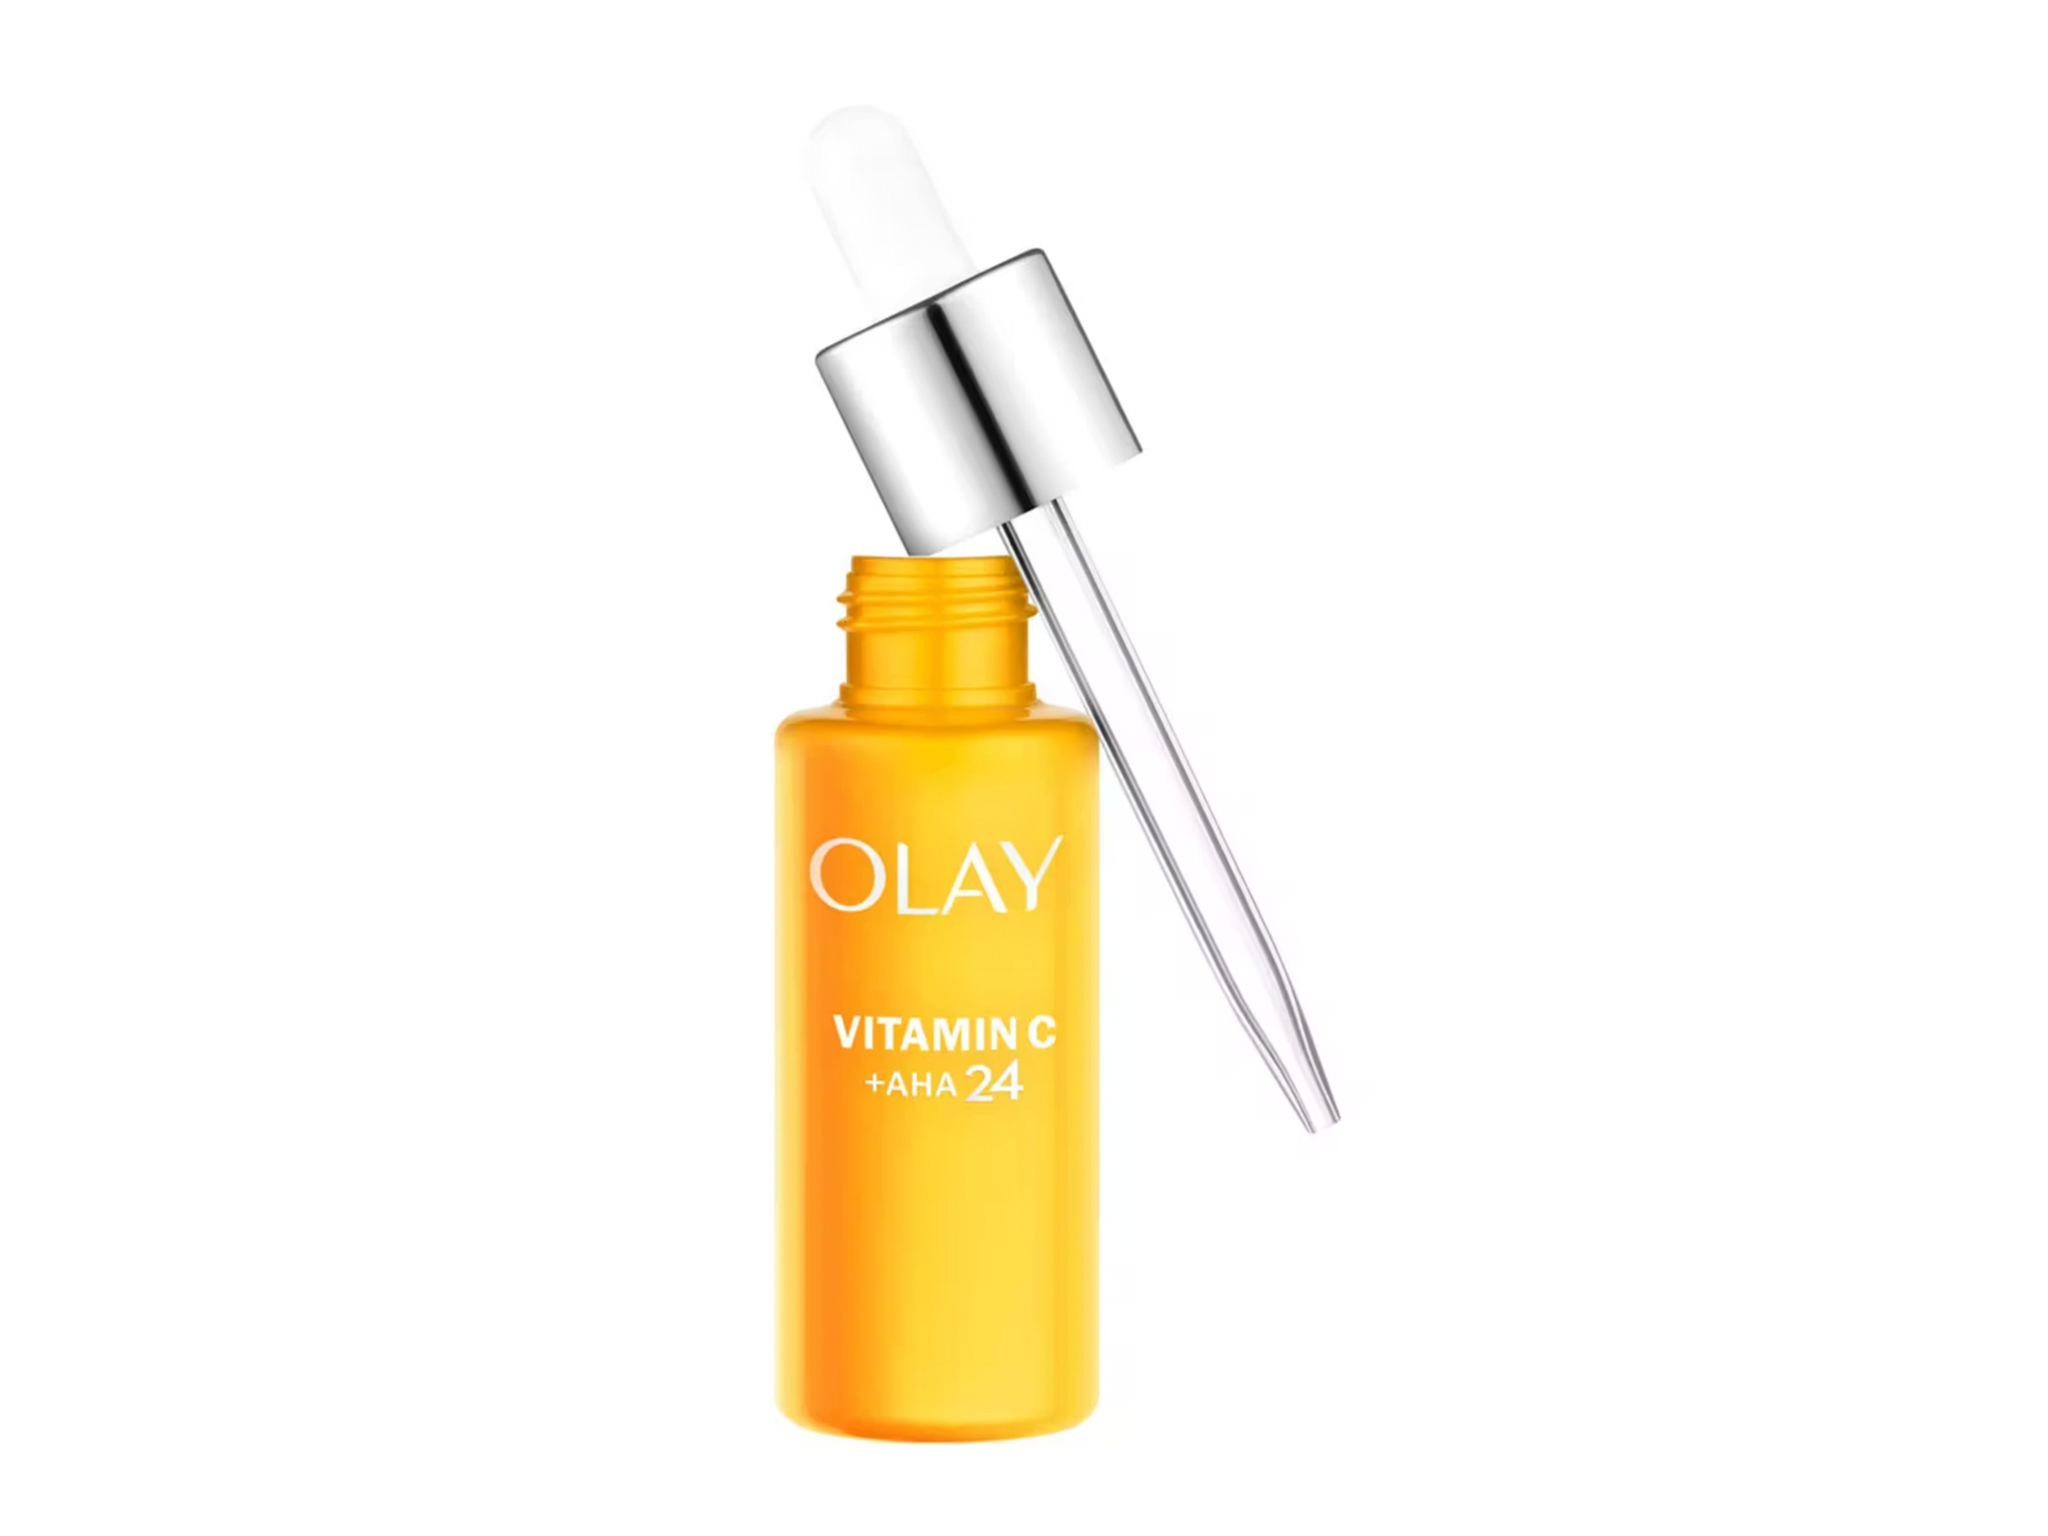 best vitamin C serum indybest review Olay vitamin C + AHA 24 day gel serum for bright and even tone